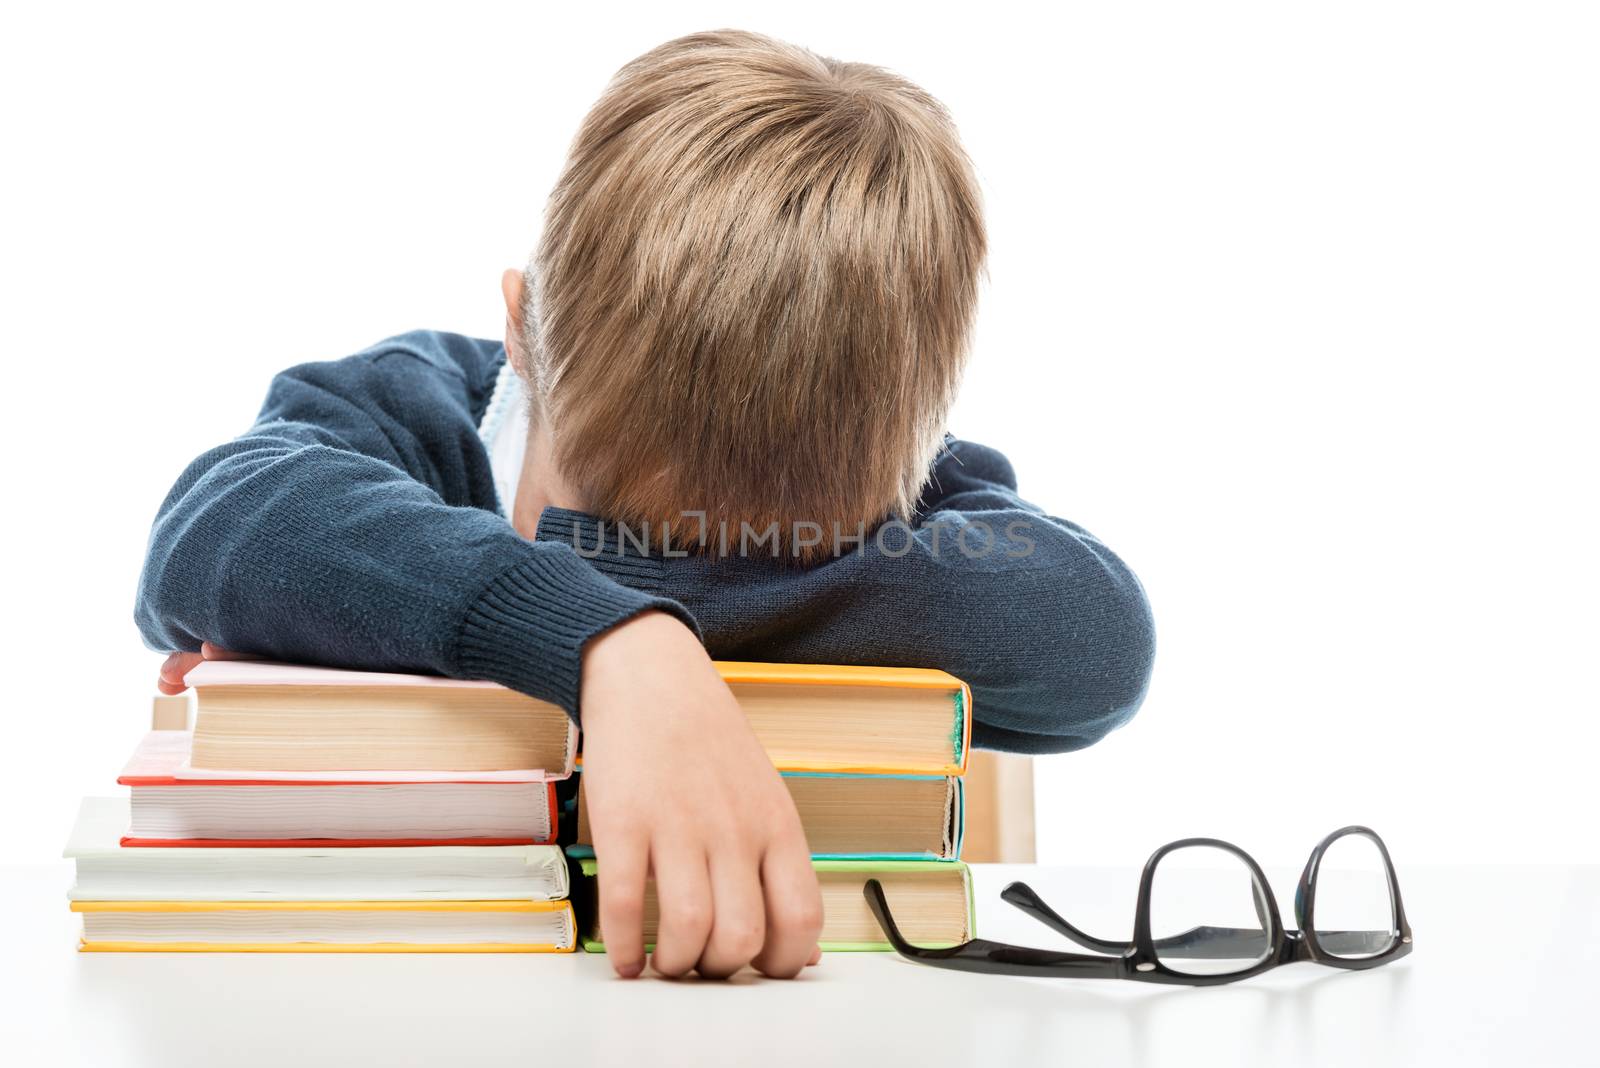 the schoolboy fell asleep on the books during the lesson at the table